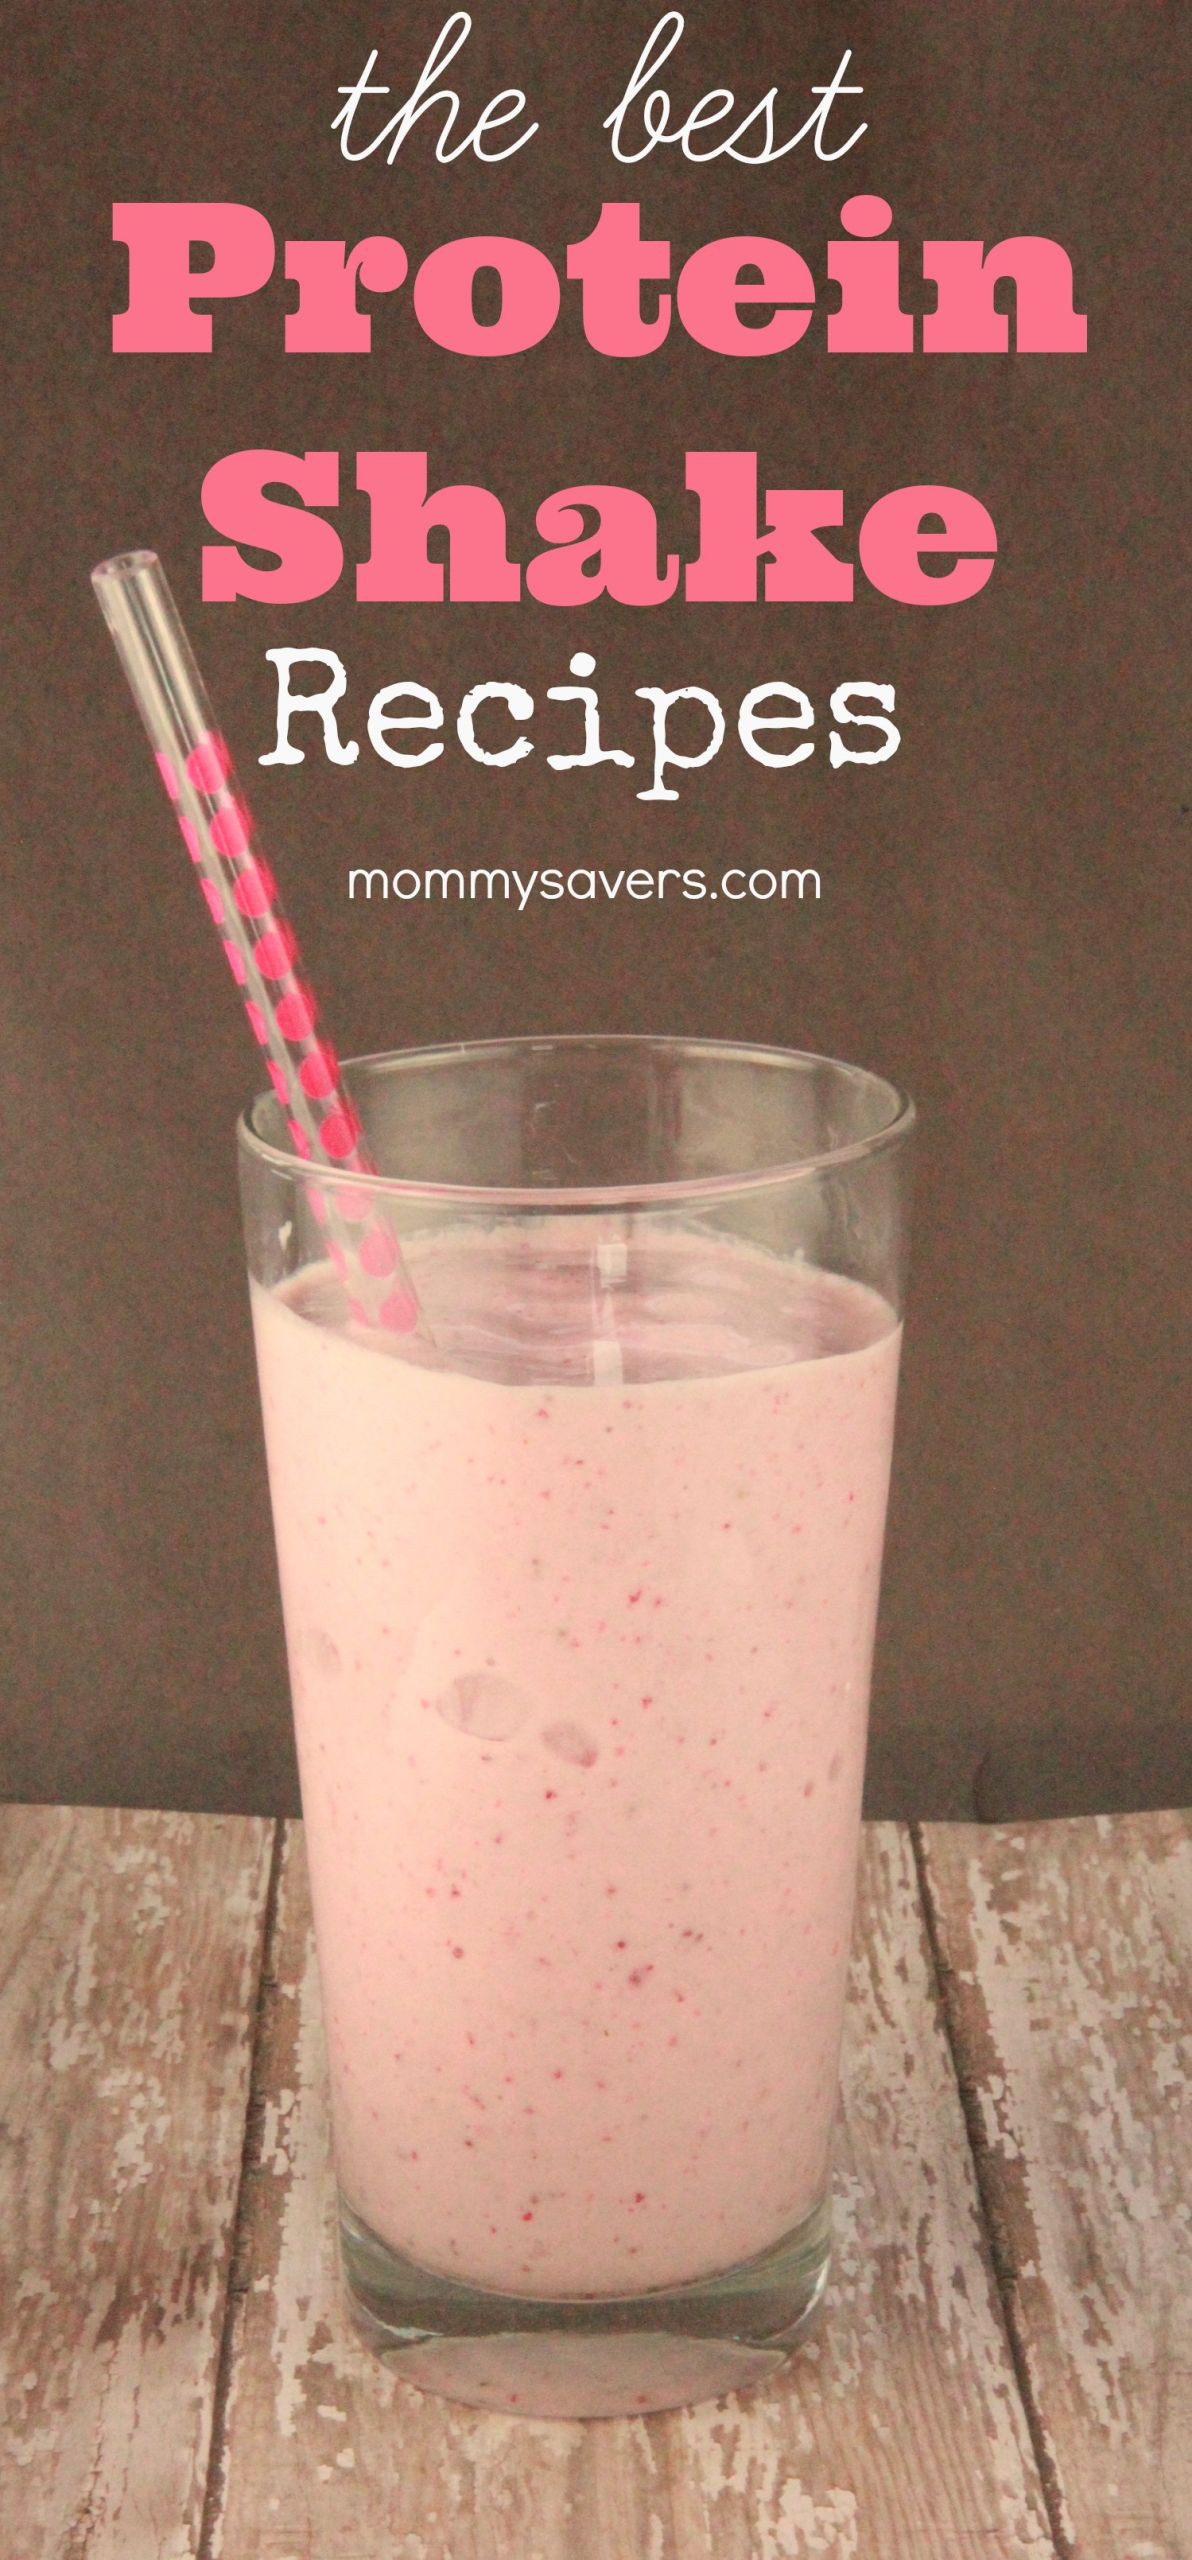 Protein Shakes Recipes For Weight Loss
 Best Protein Shake Recipes Mommysavers